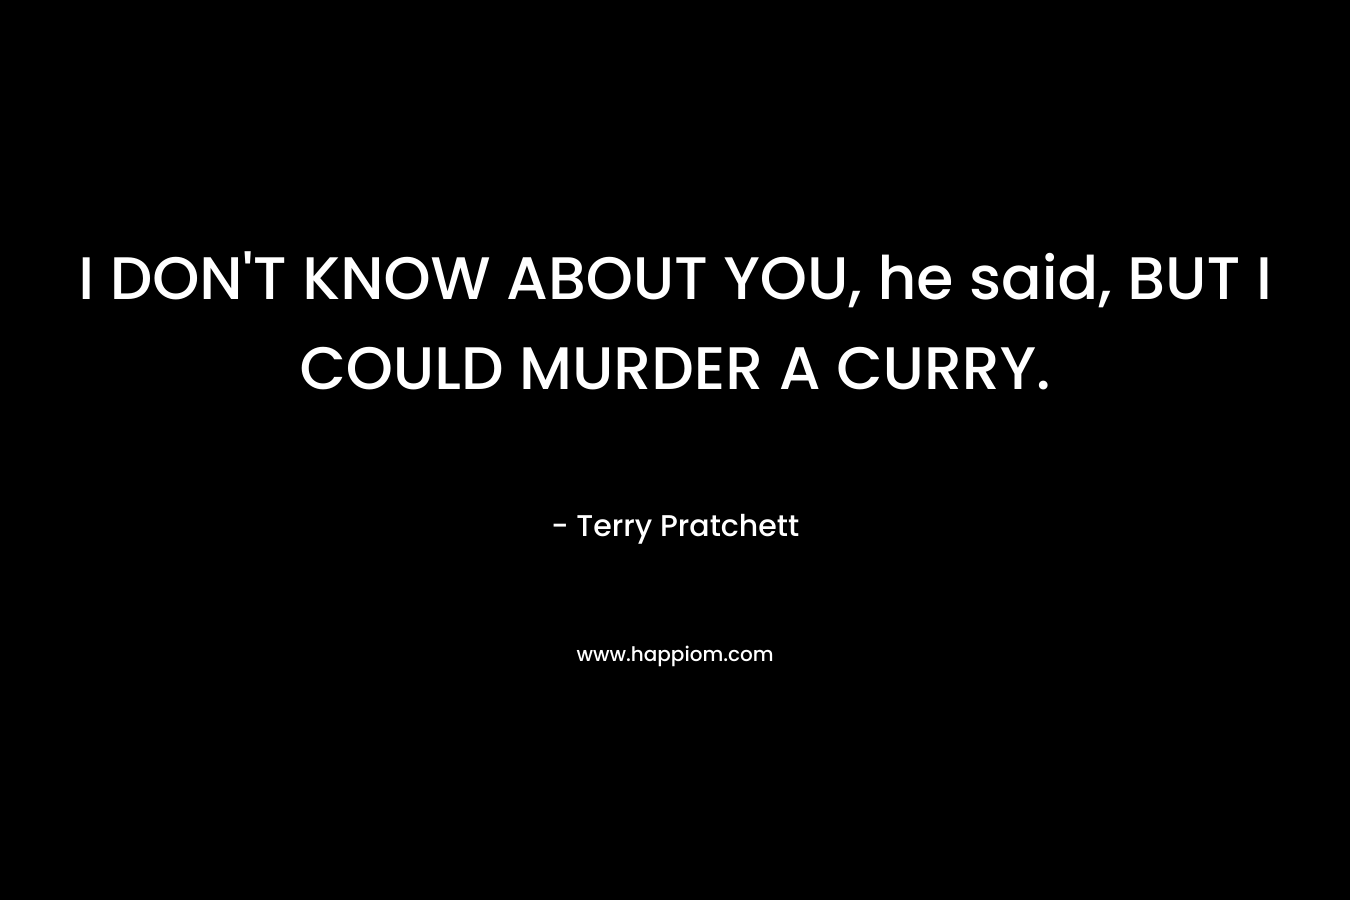 I DON'T KNOW ABOUT YOU, he said, BUT I COULD MURDER A CURRY.